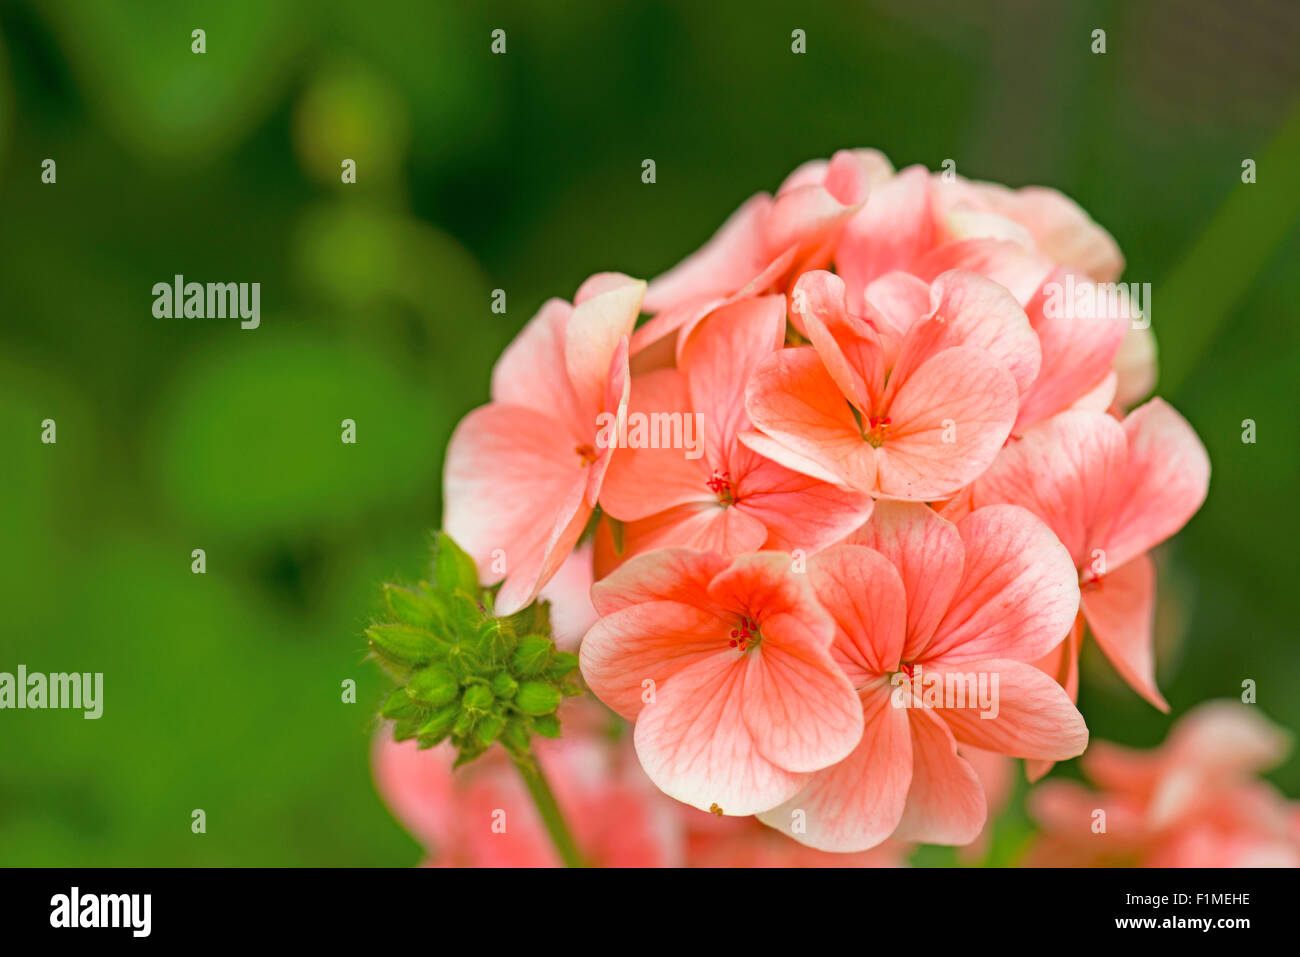 Bunch of pink flowers in the garden Stock Photo